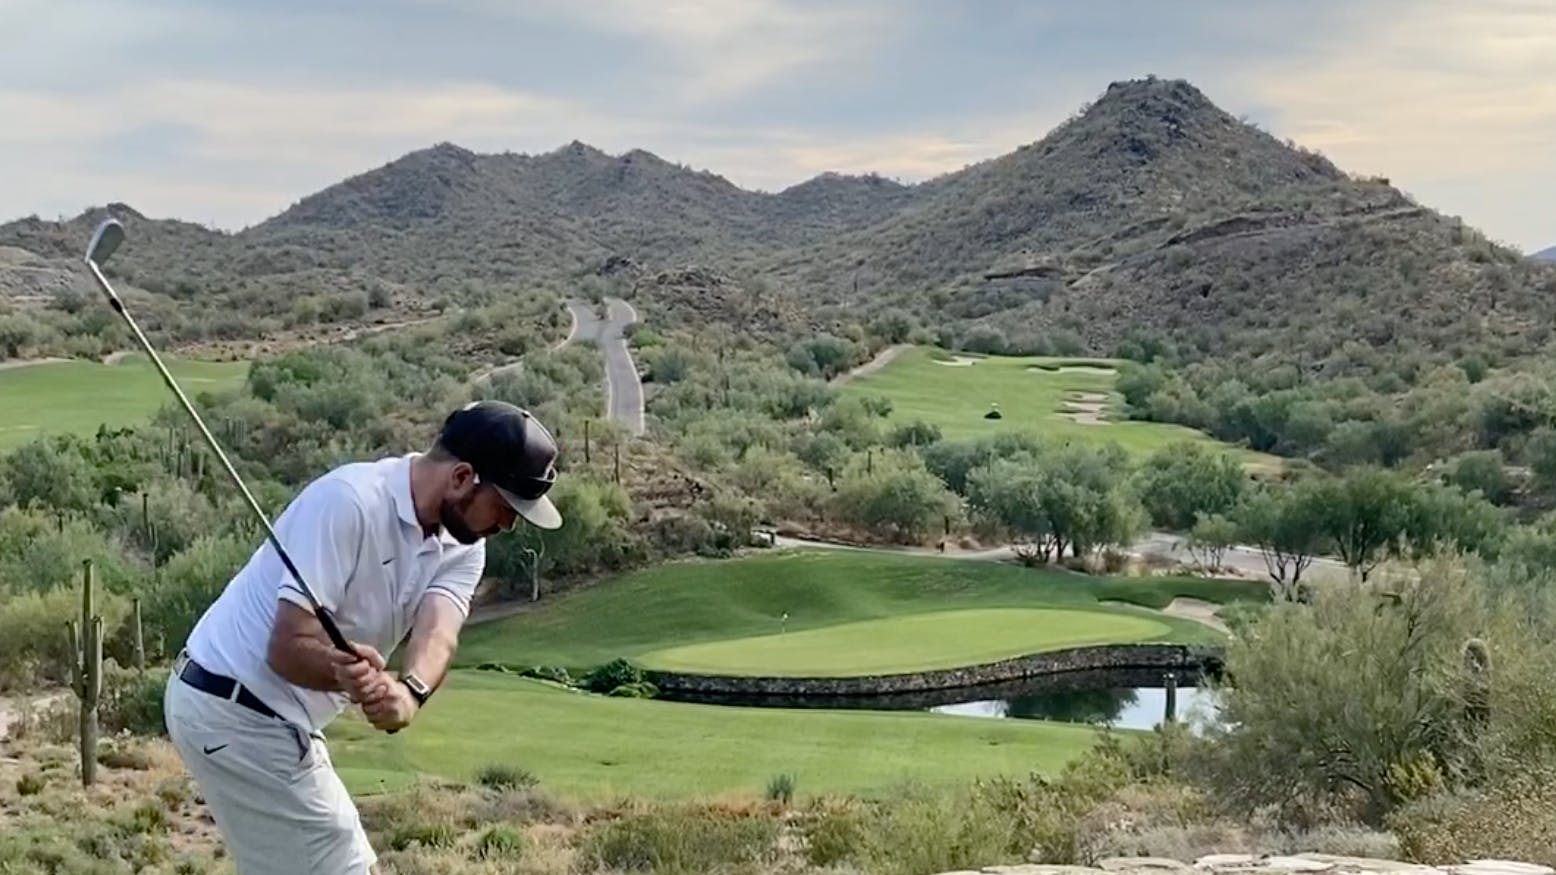 A man takes a swing at a tee that overlooks the rest of the golf course in a desert environment. 